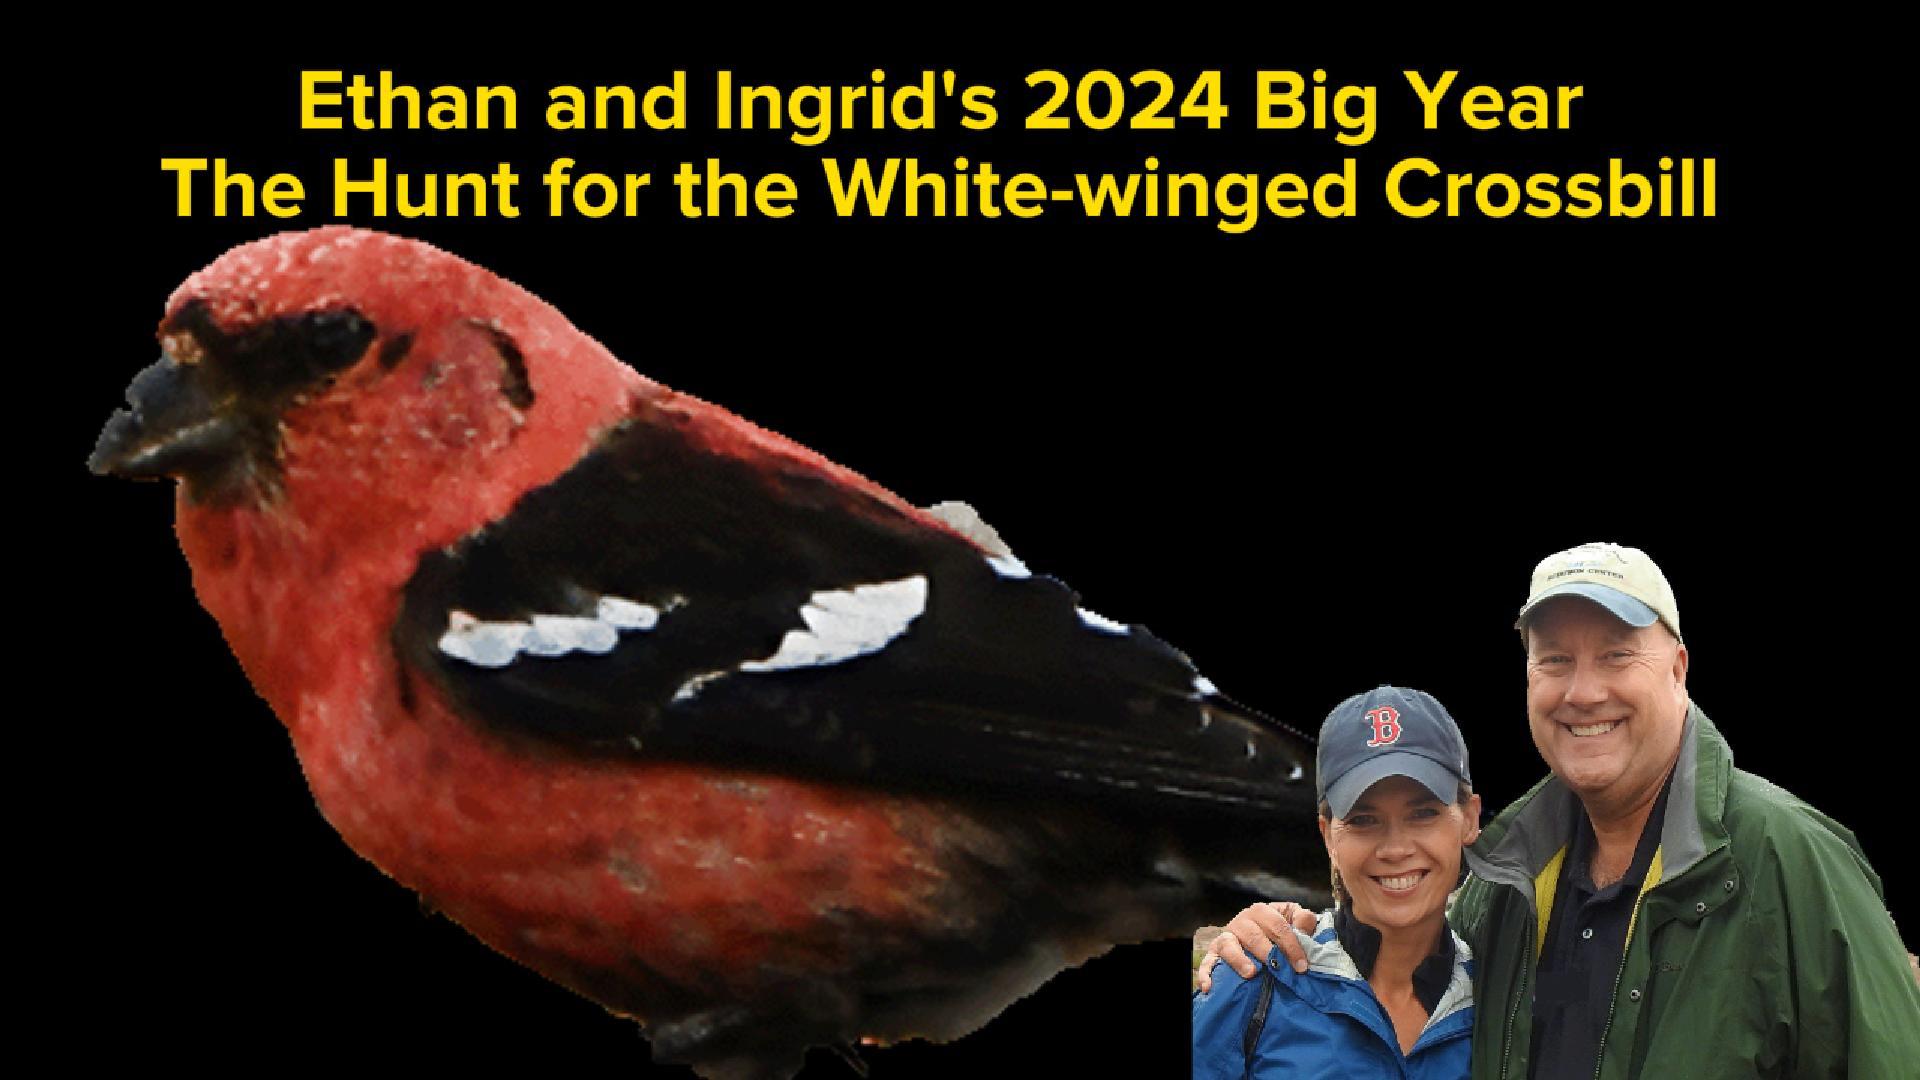 The Hunt for the White-winged Crossbill